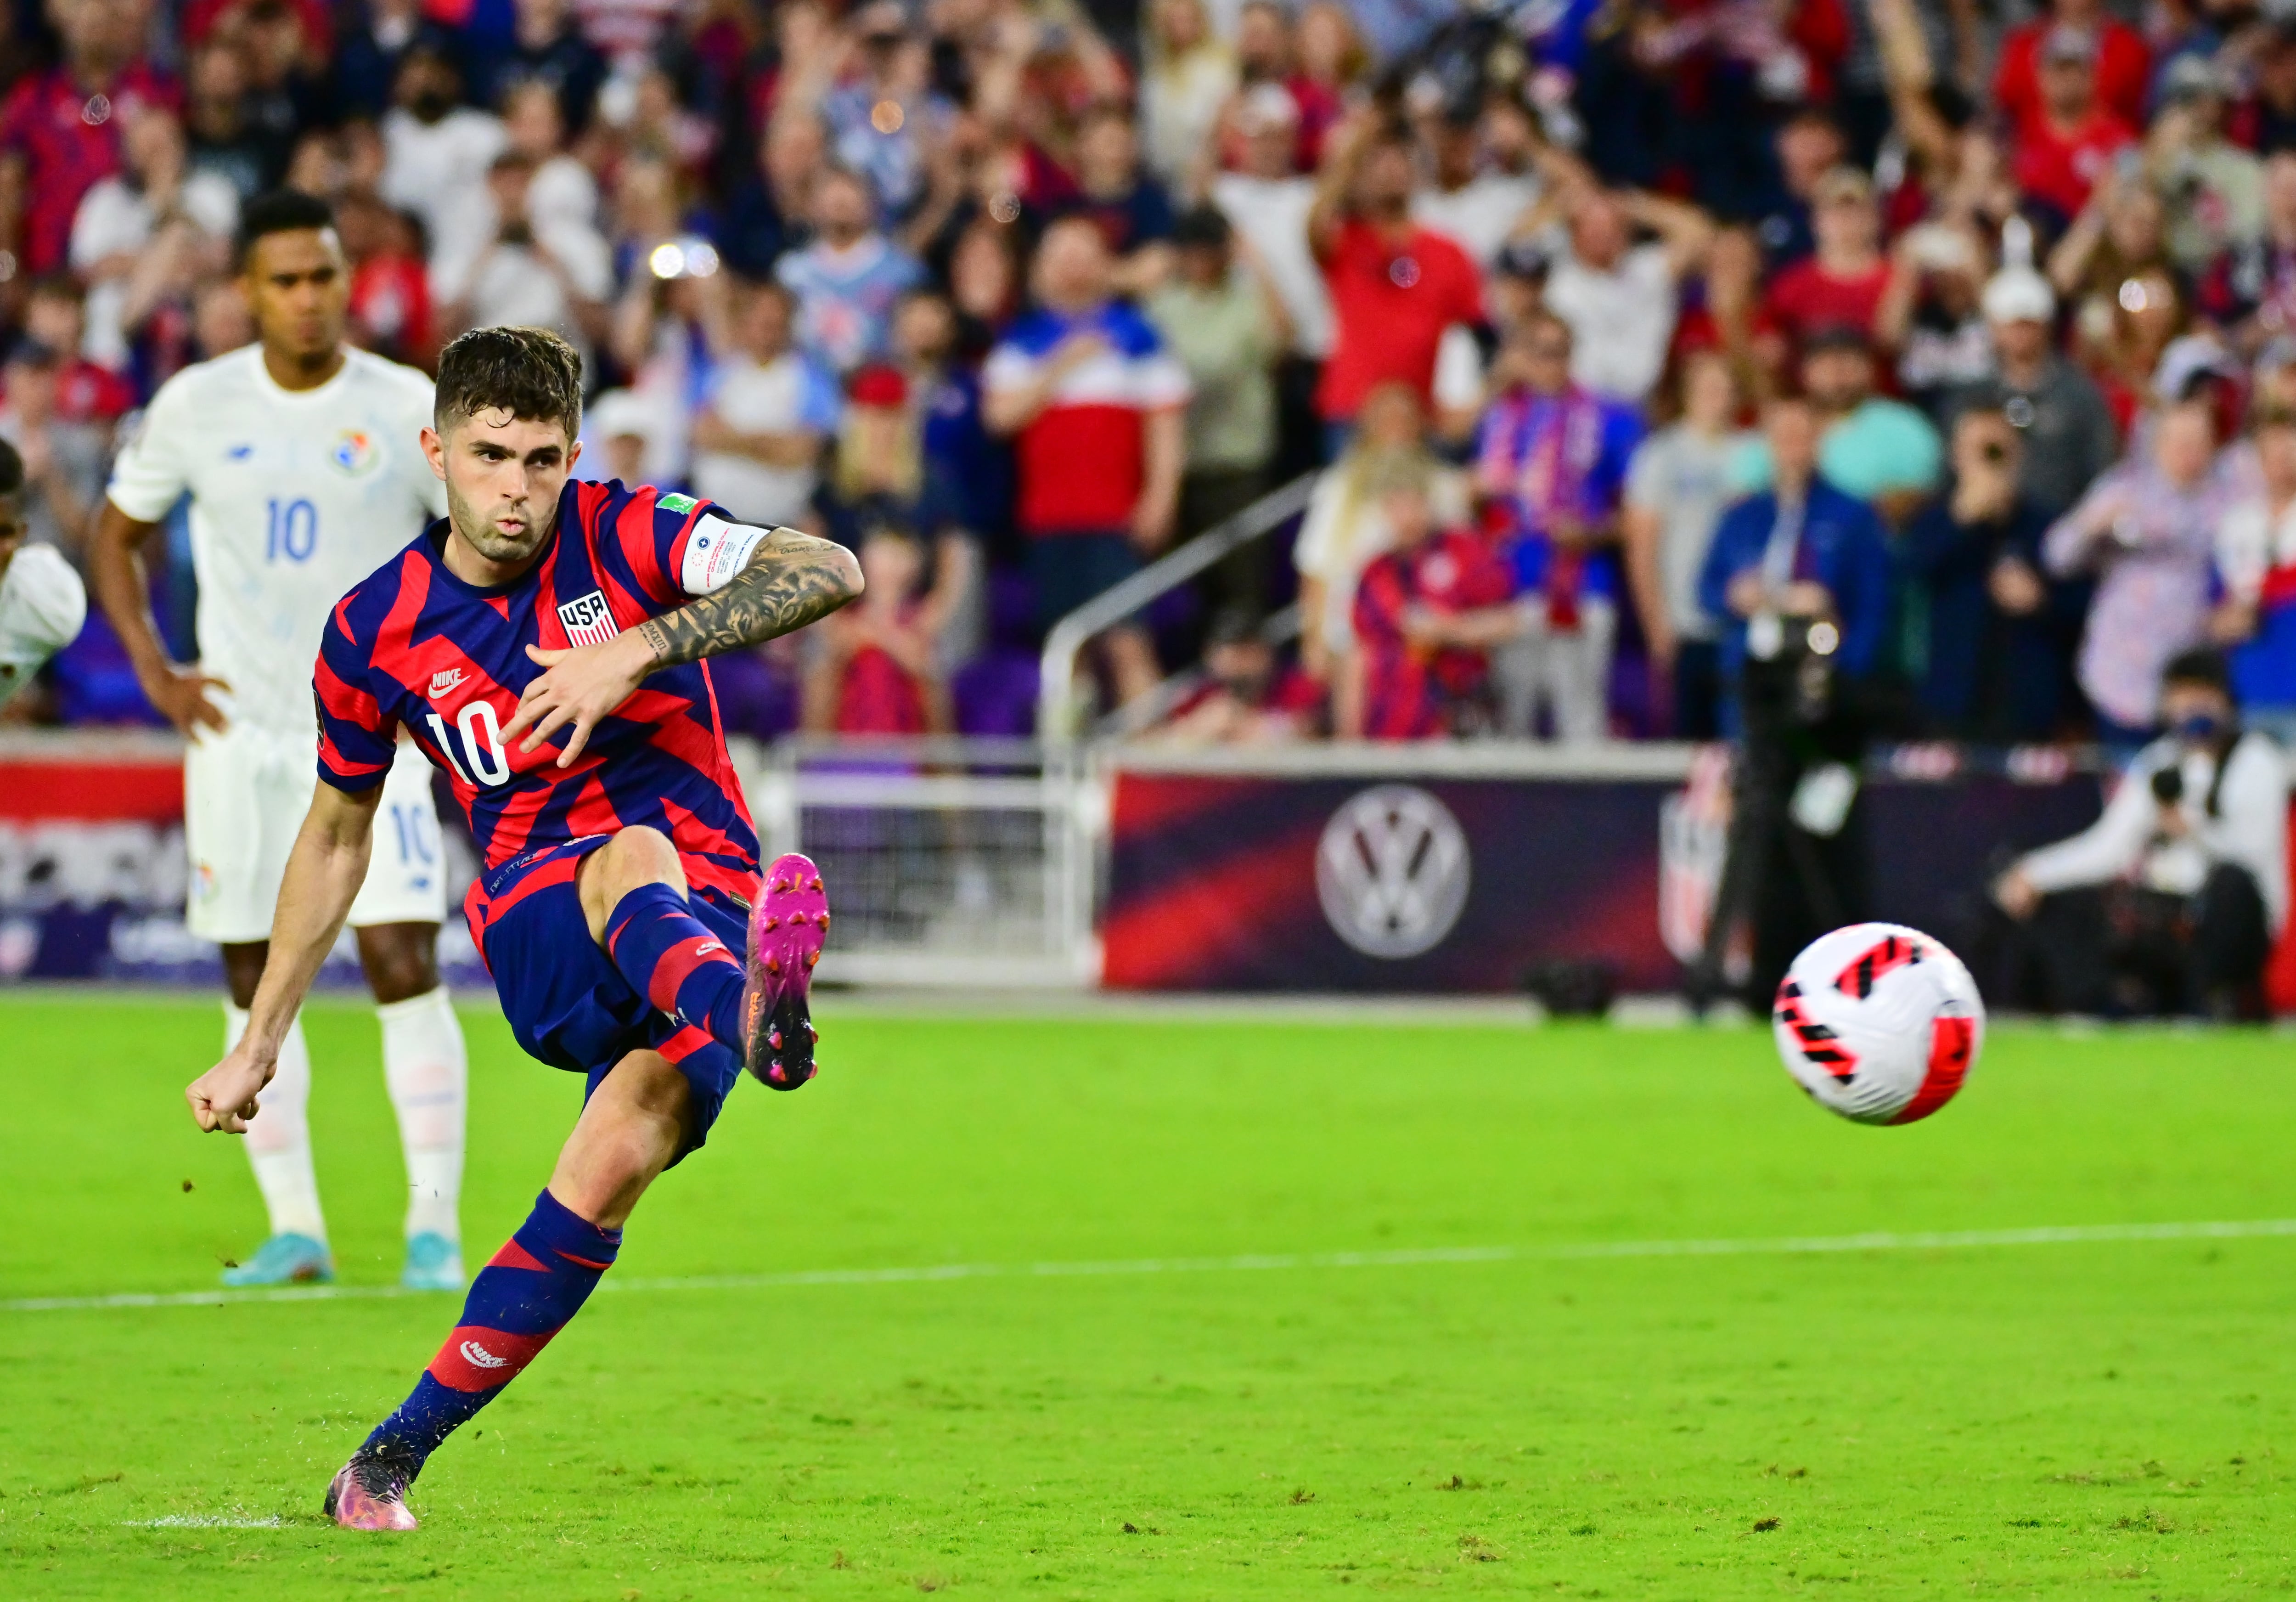 Christian Pulisic of the USA team takes a penalty kick against Panama in March 2022.